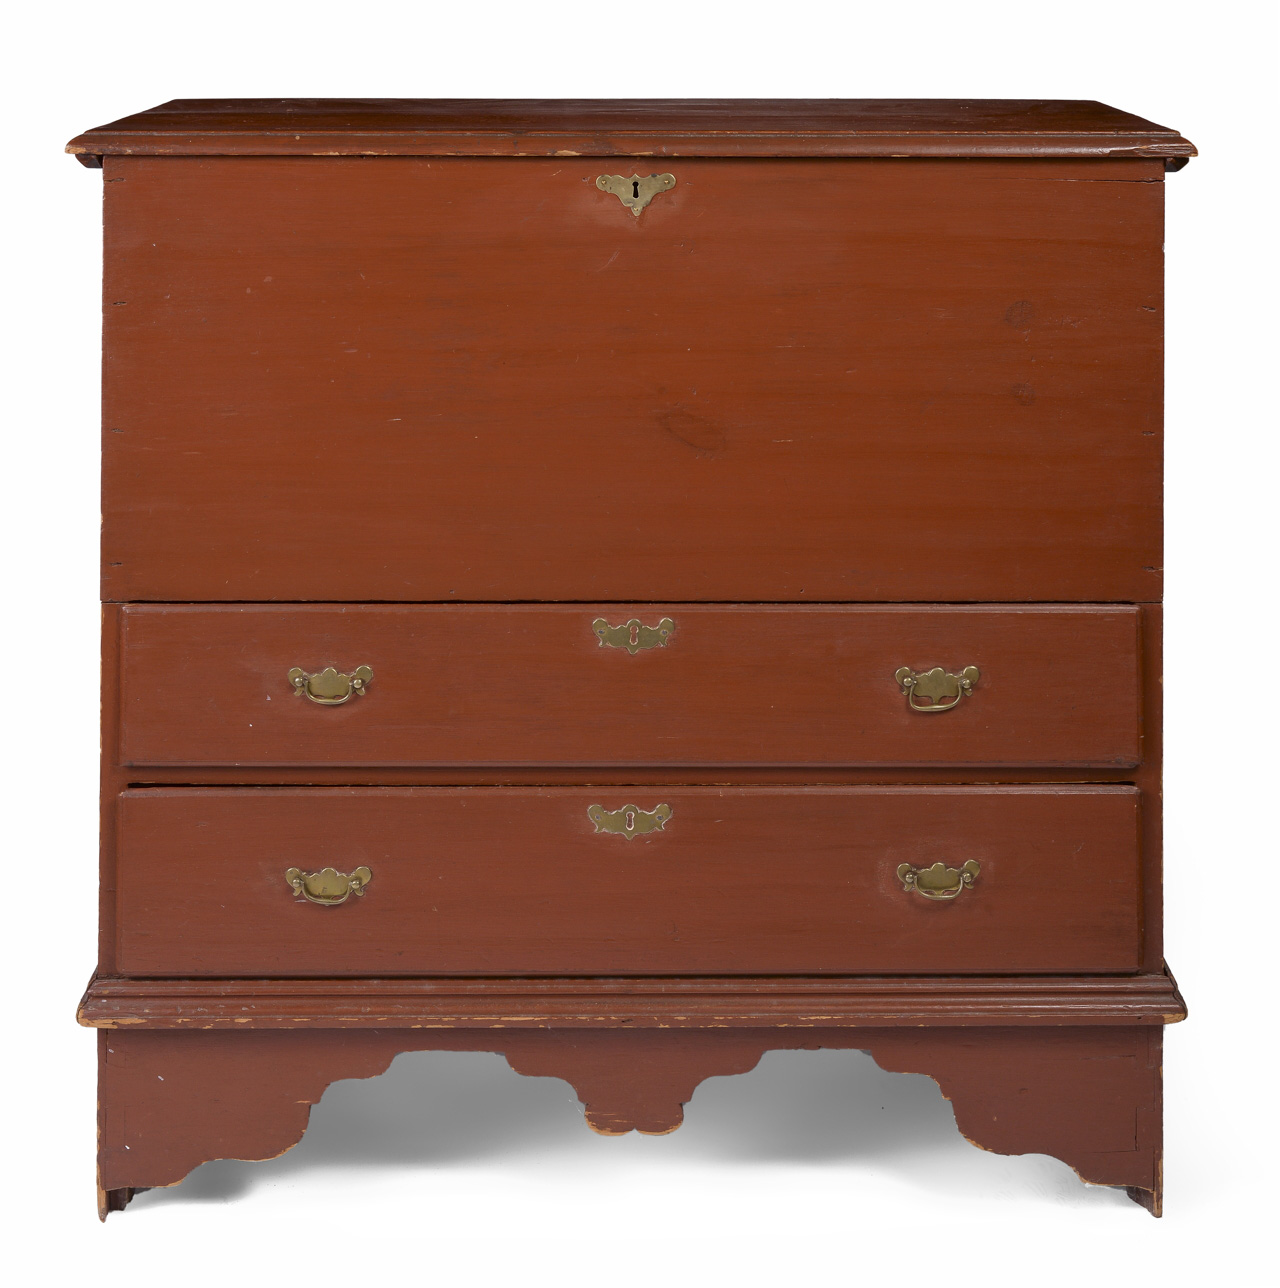 A fine country Queen Anne two drawer blanket chest